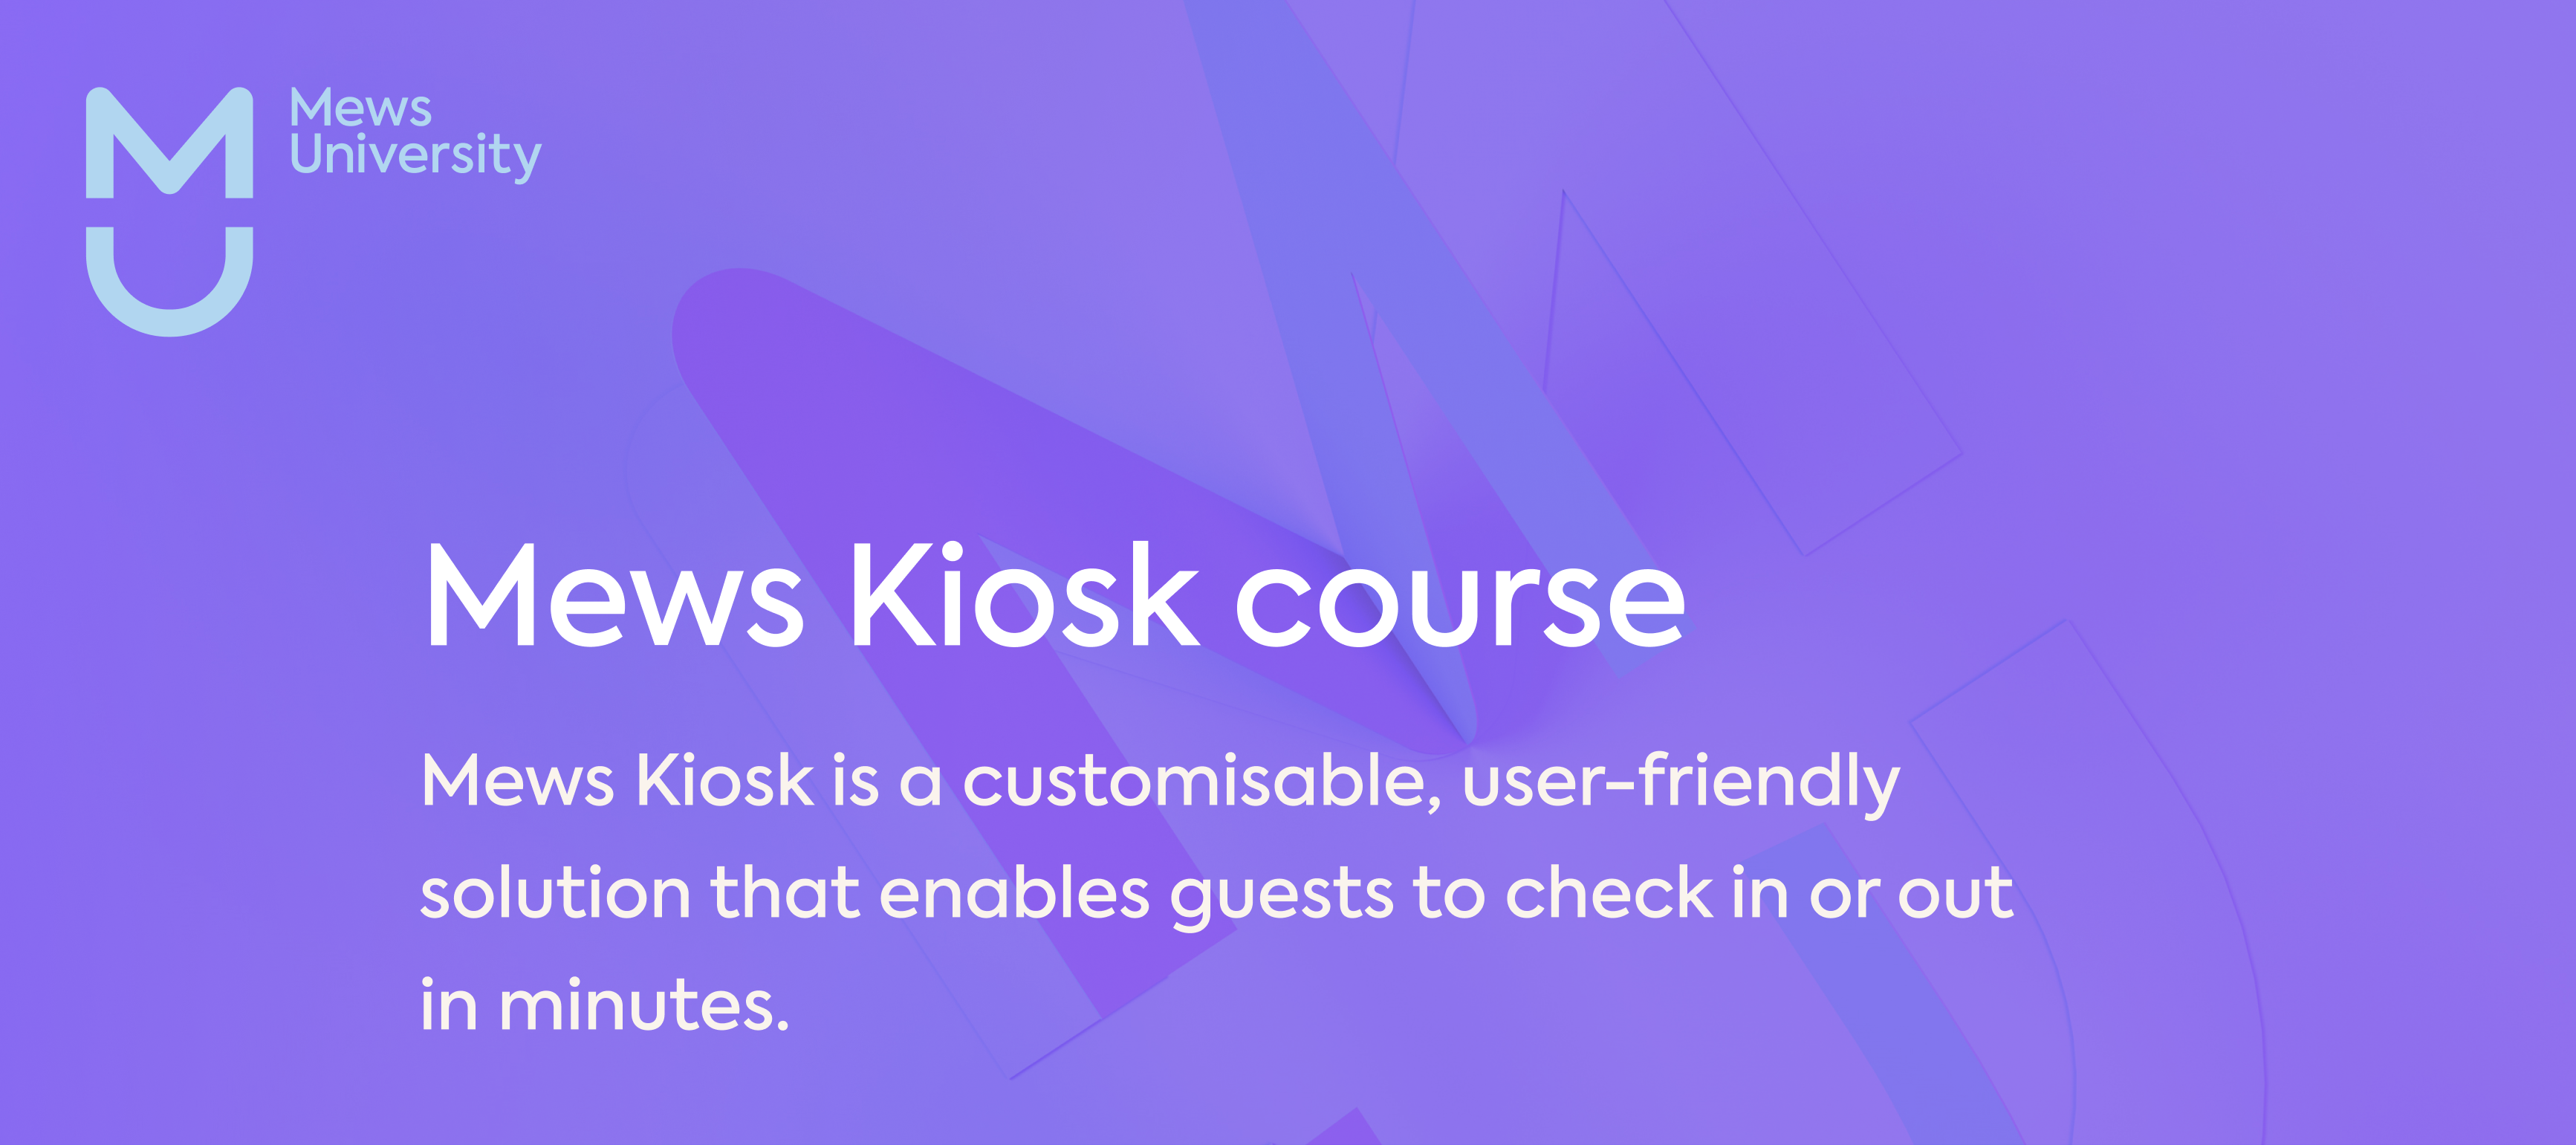 Mews University update: Mews Kiosk course now available